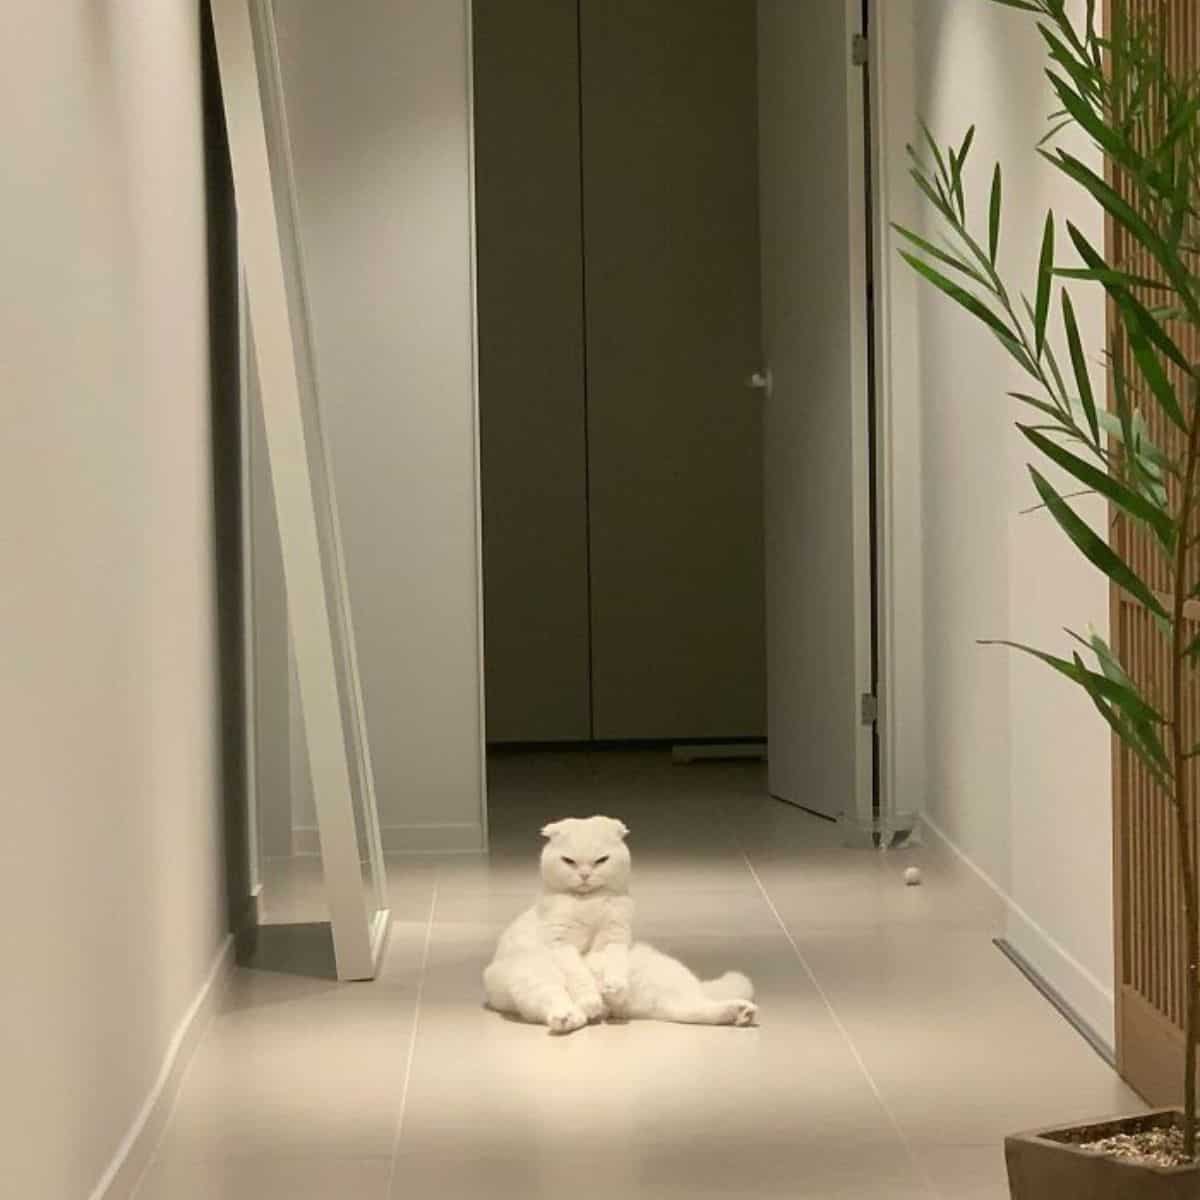 an angry white cat sits in the hallway on the tiles